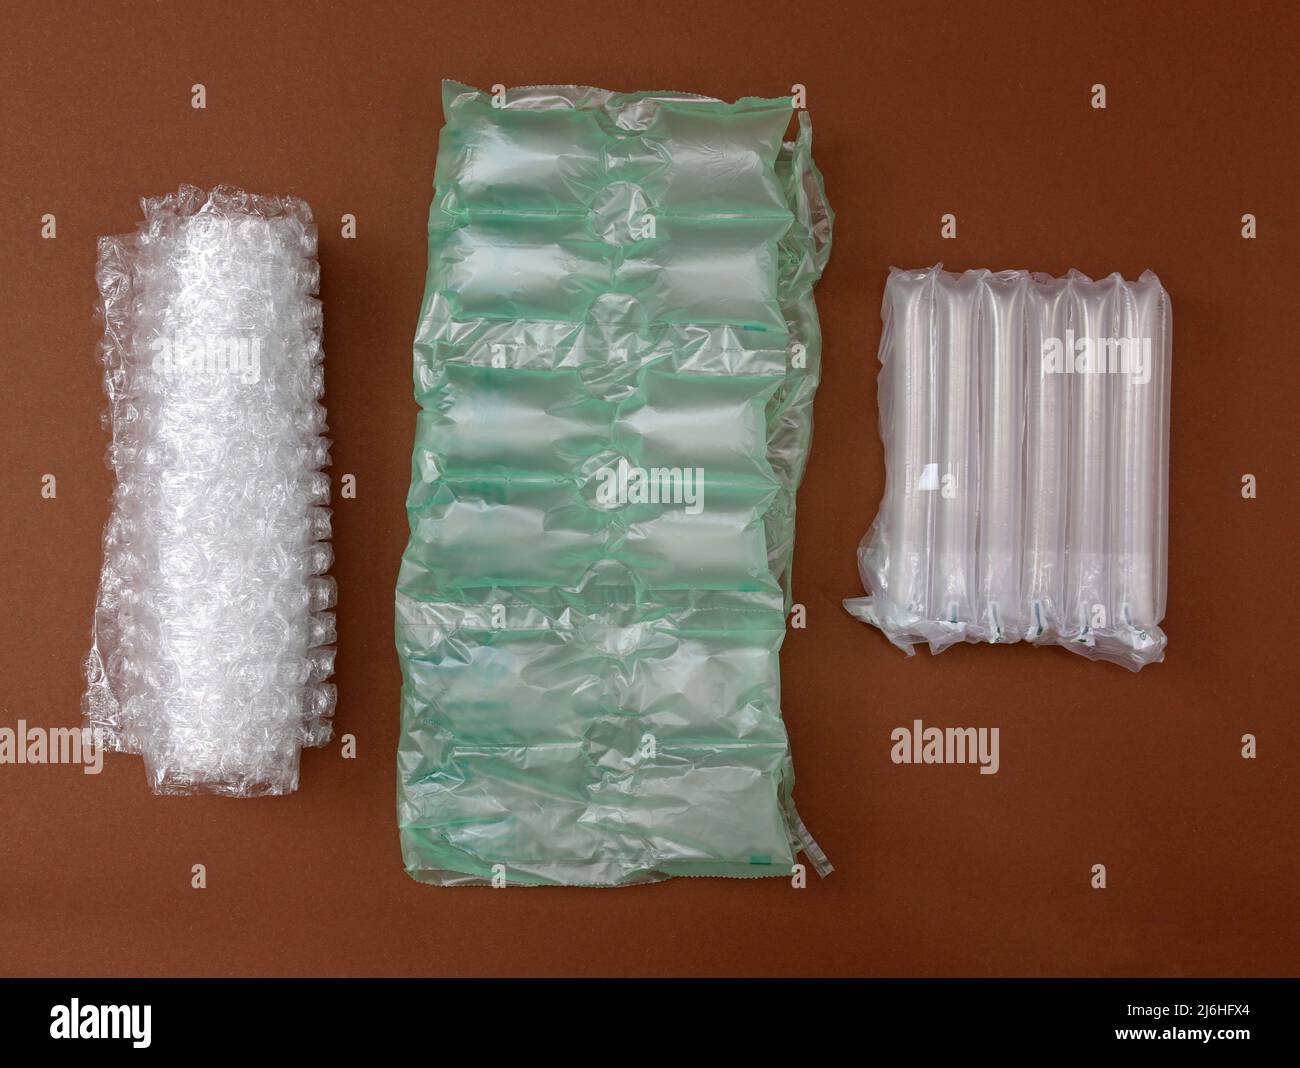 All Types of Bubble-Rap Packaging.